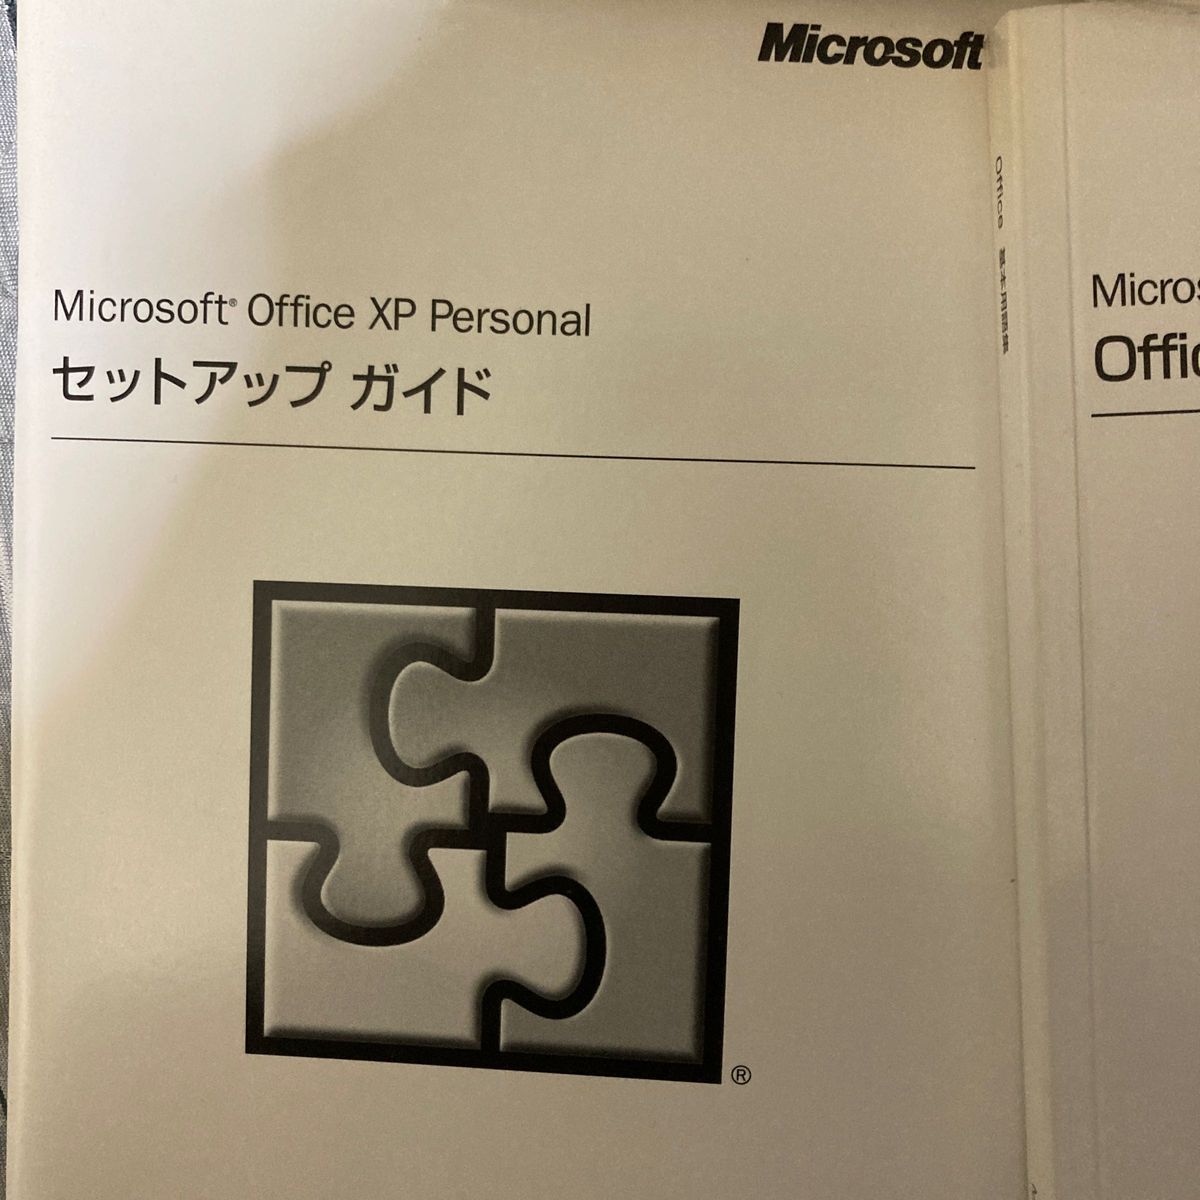 Microsoft Office XP Personal 総合ビジネスプラットフォーム　開封済み